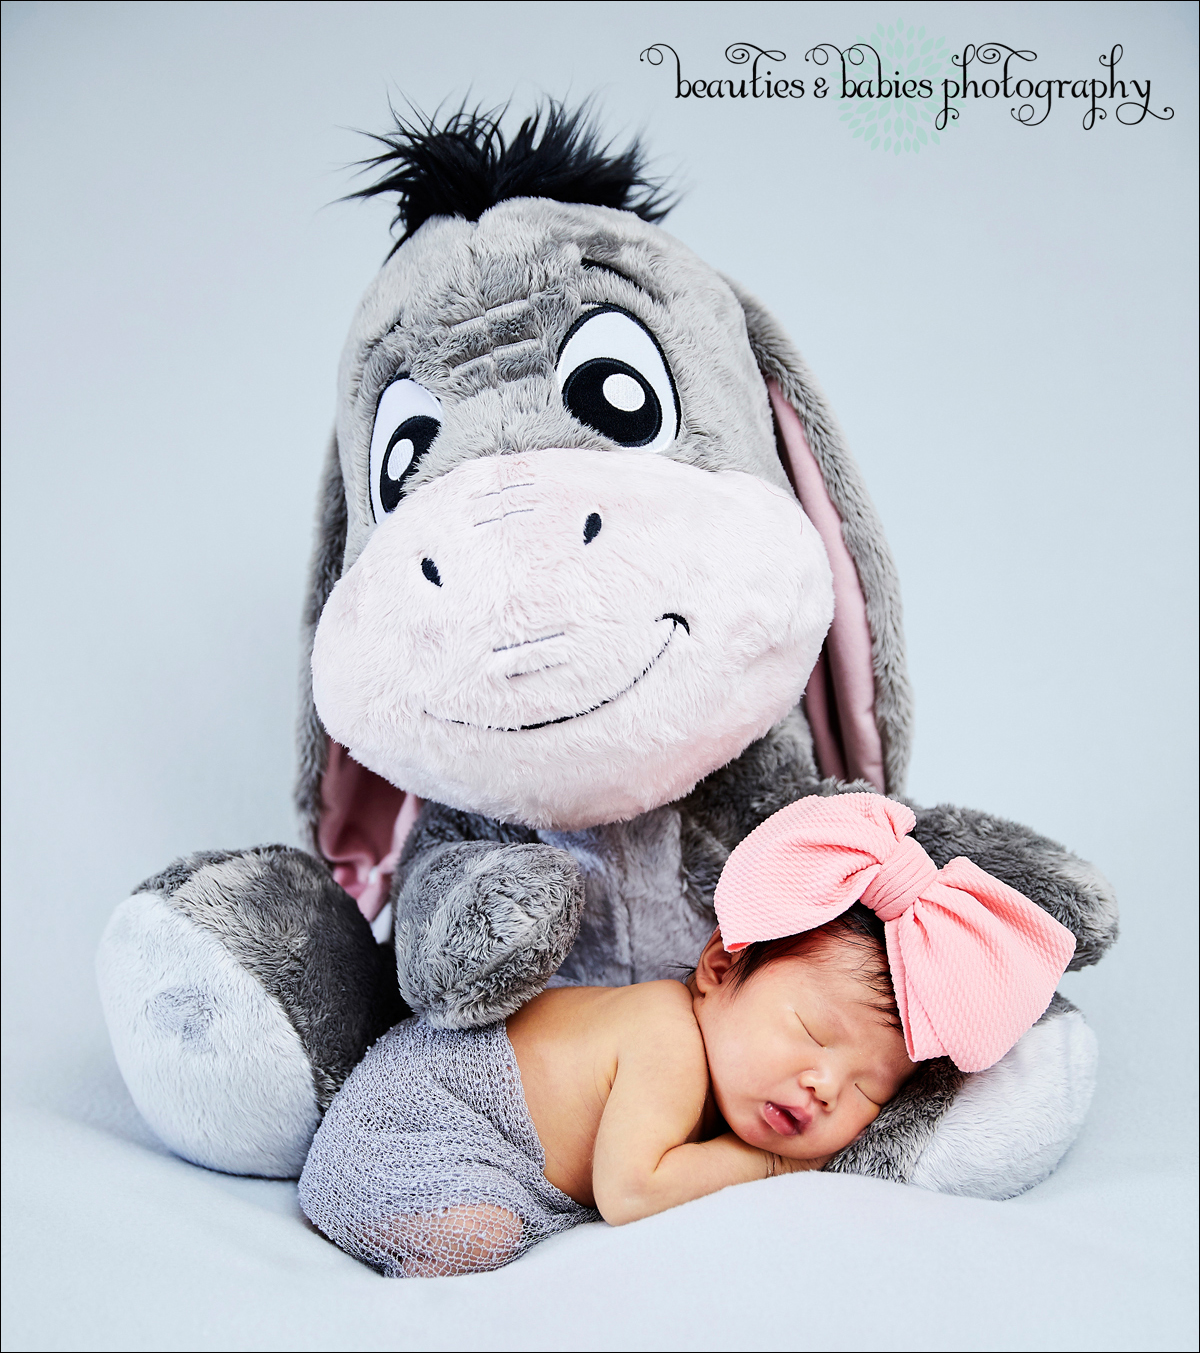 At home newborn baby photographer West Los Angeles professional pictures